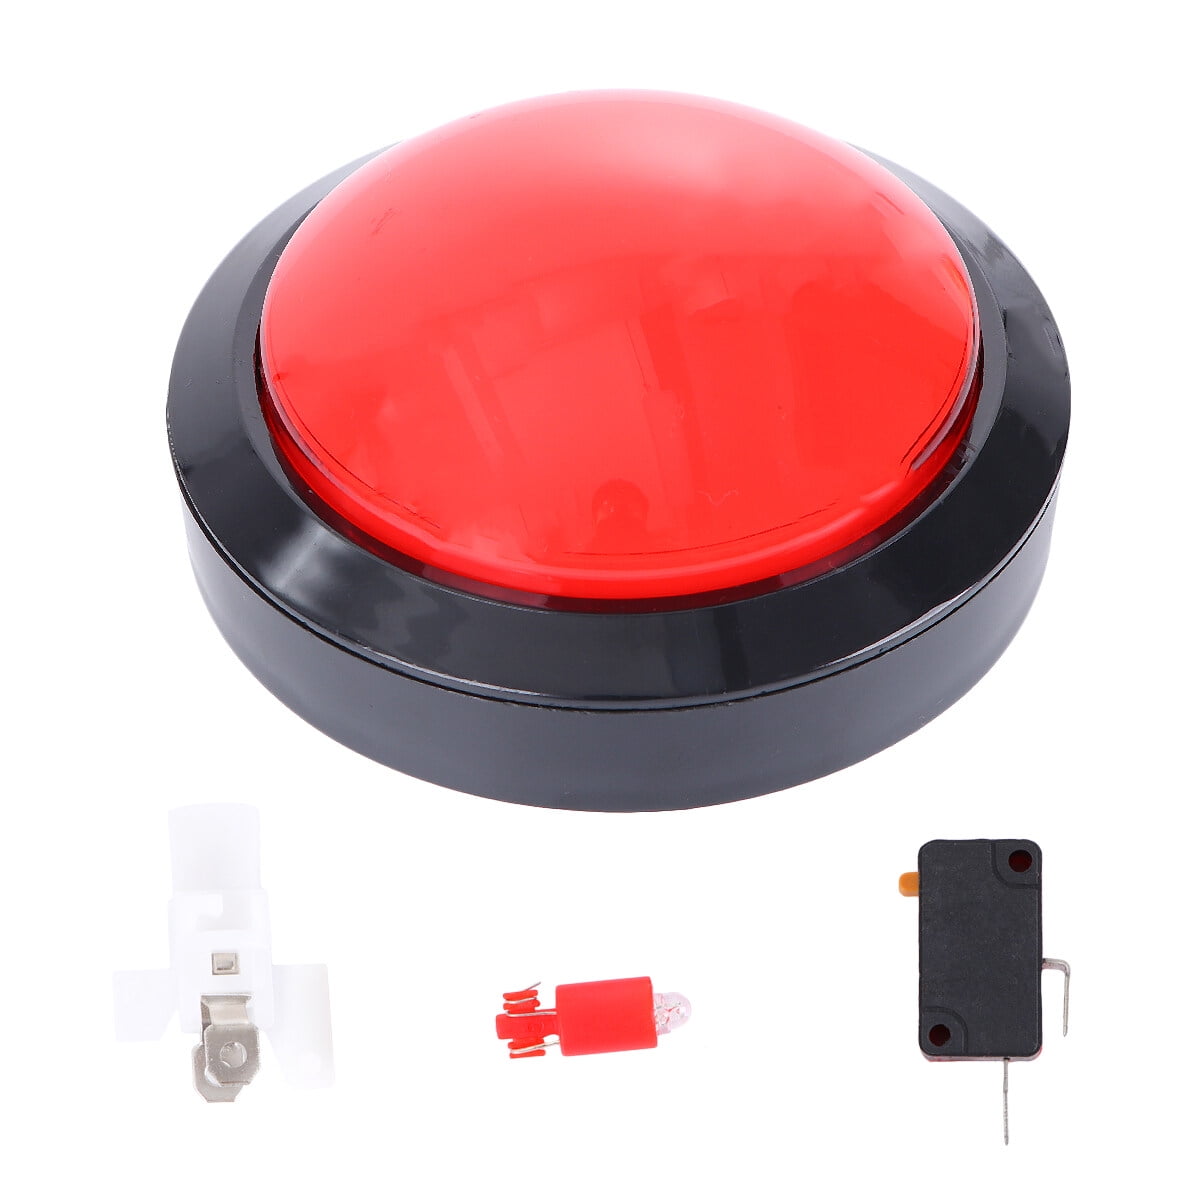 Red Button Toy Sounds Quiz Answer Press Button Supplies